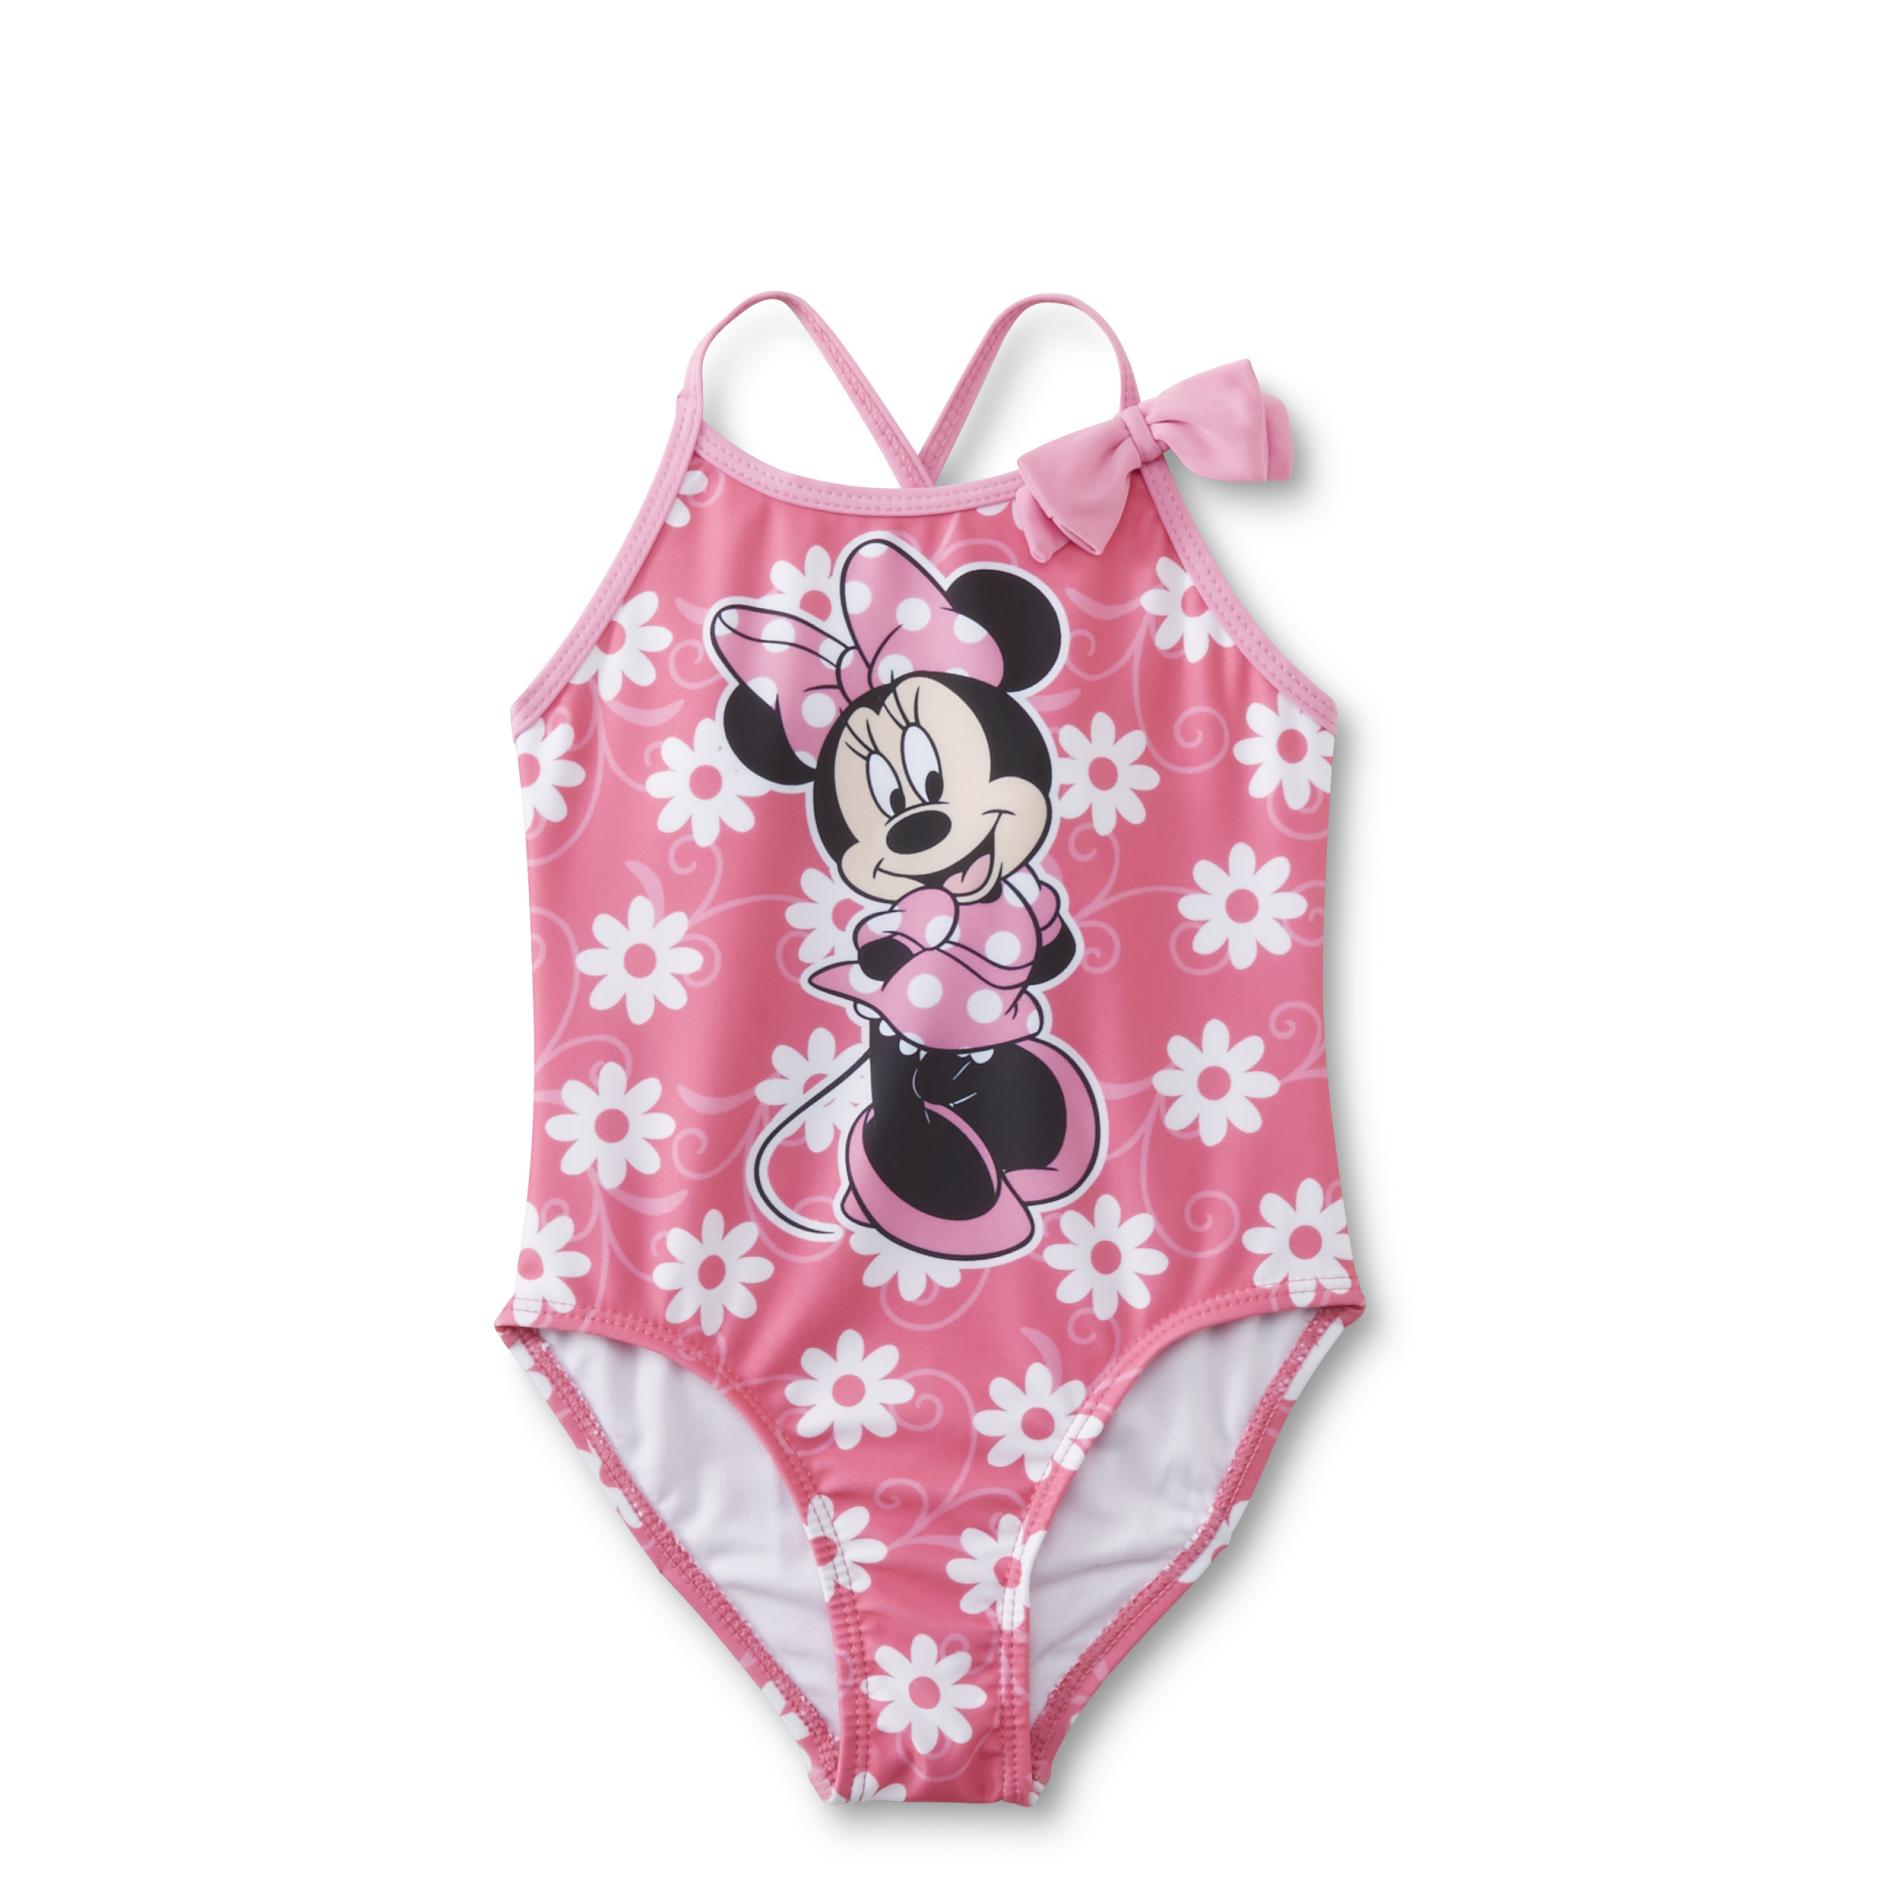 Disney Baby Minnie Mouse Toddler Girl's Swimsuit - Floral | Shop Your ...